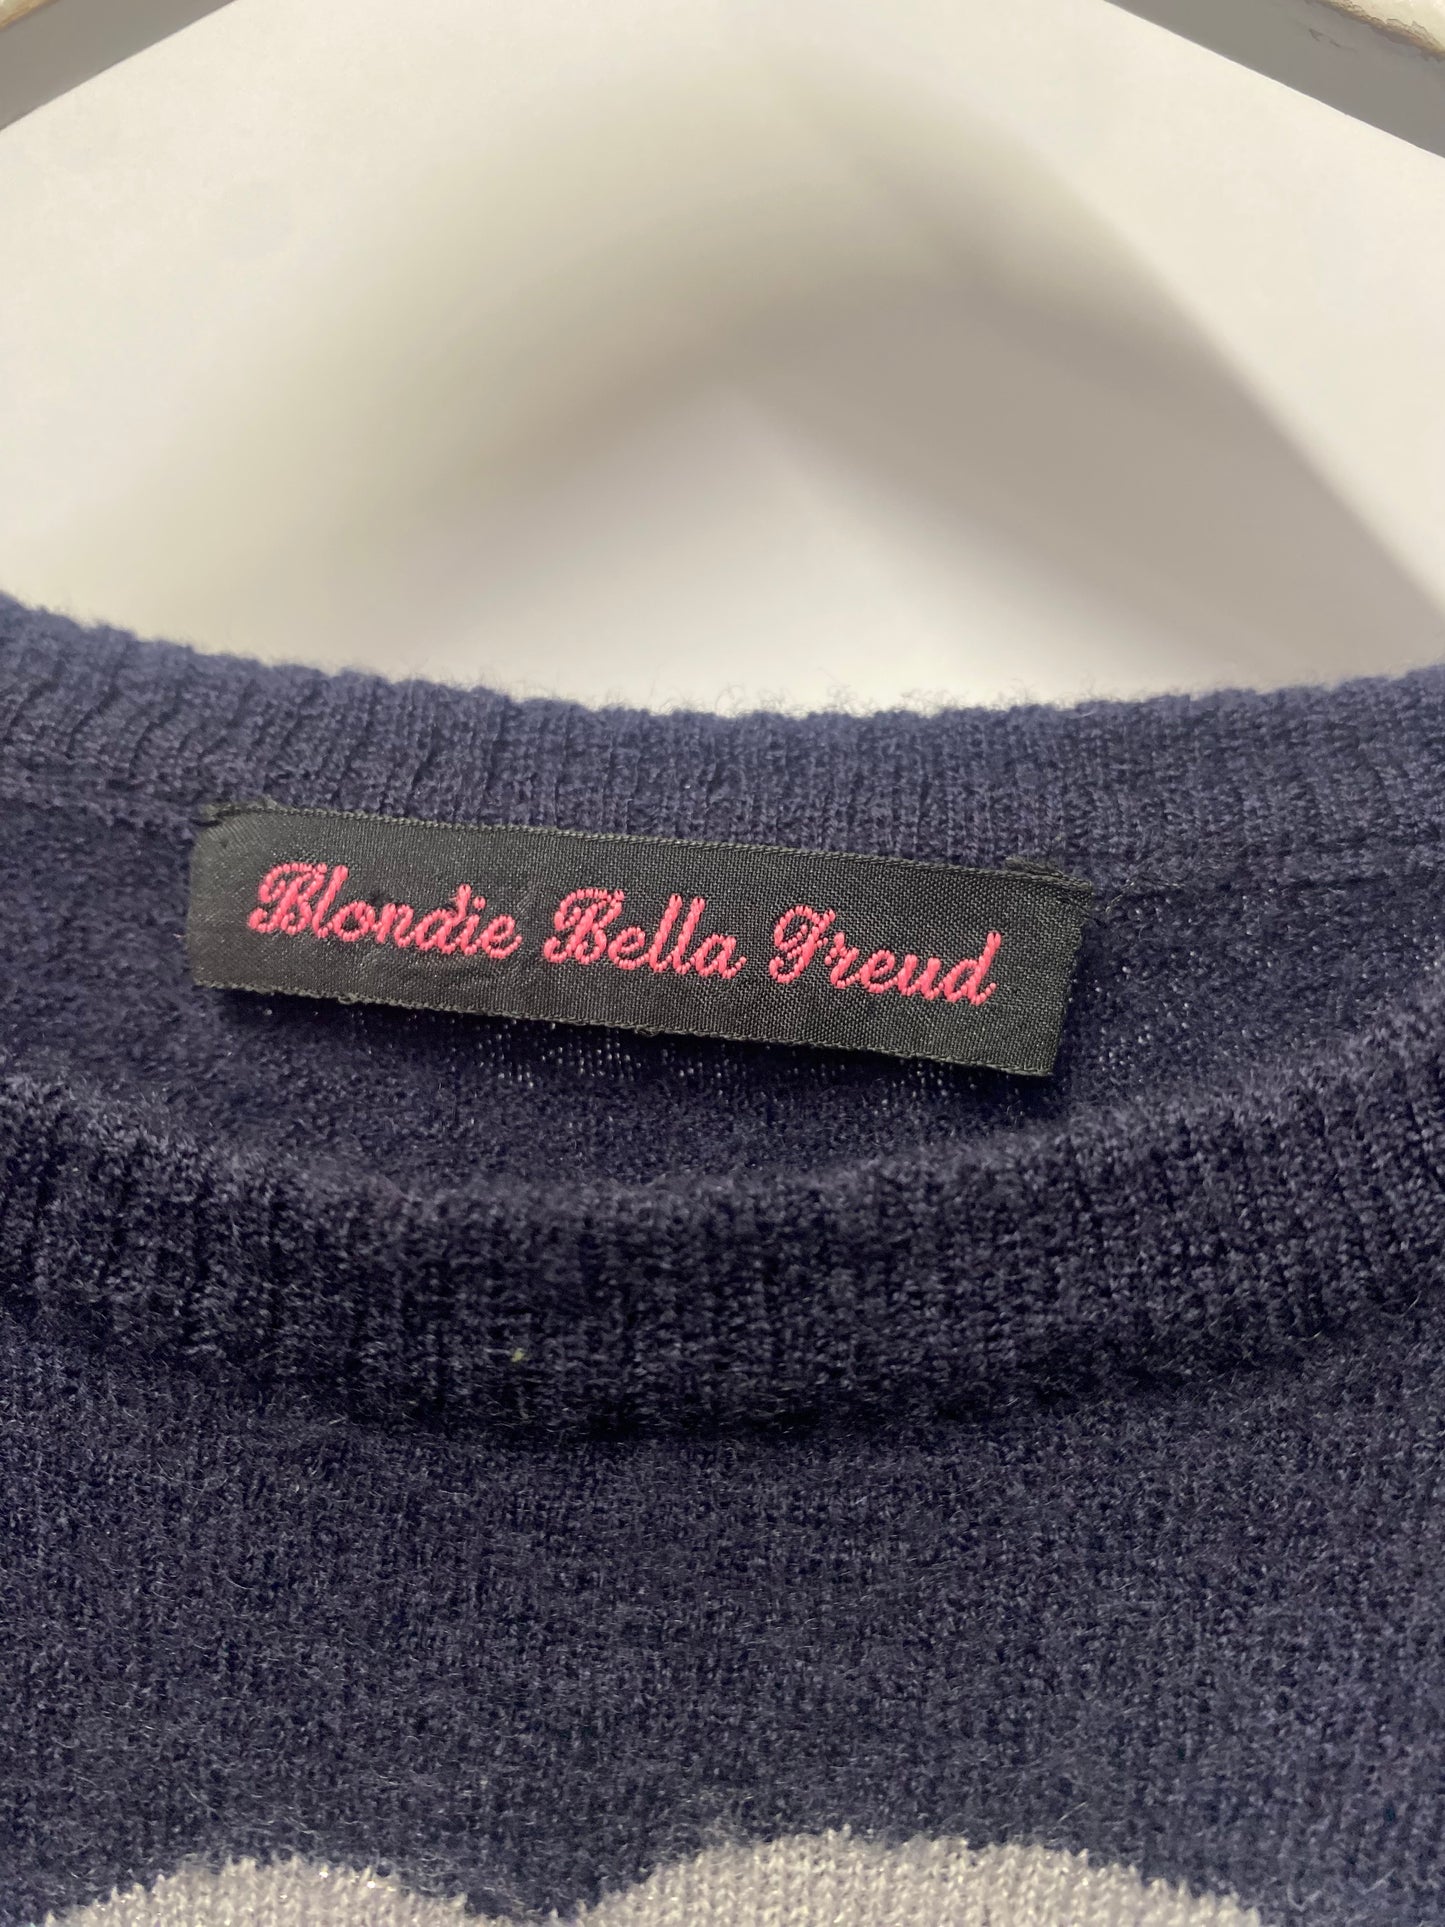 Bella Freud Navy Phoebe Knitted Jumper XS